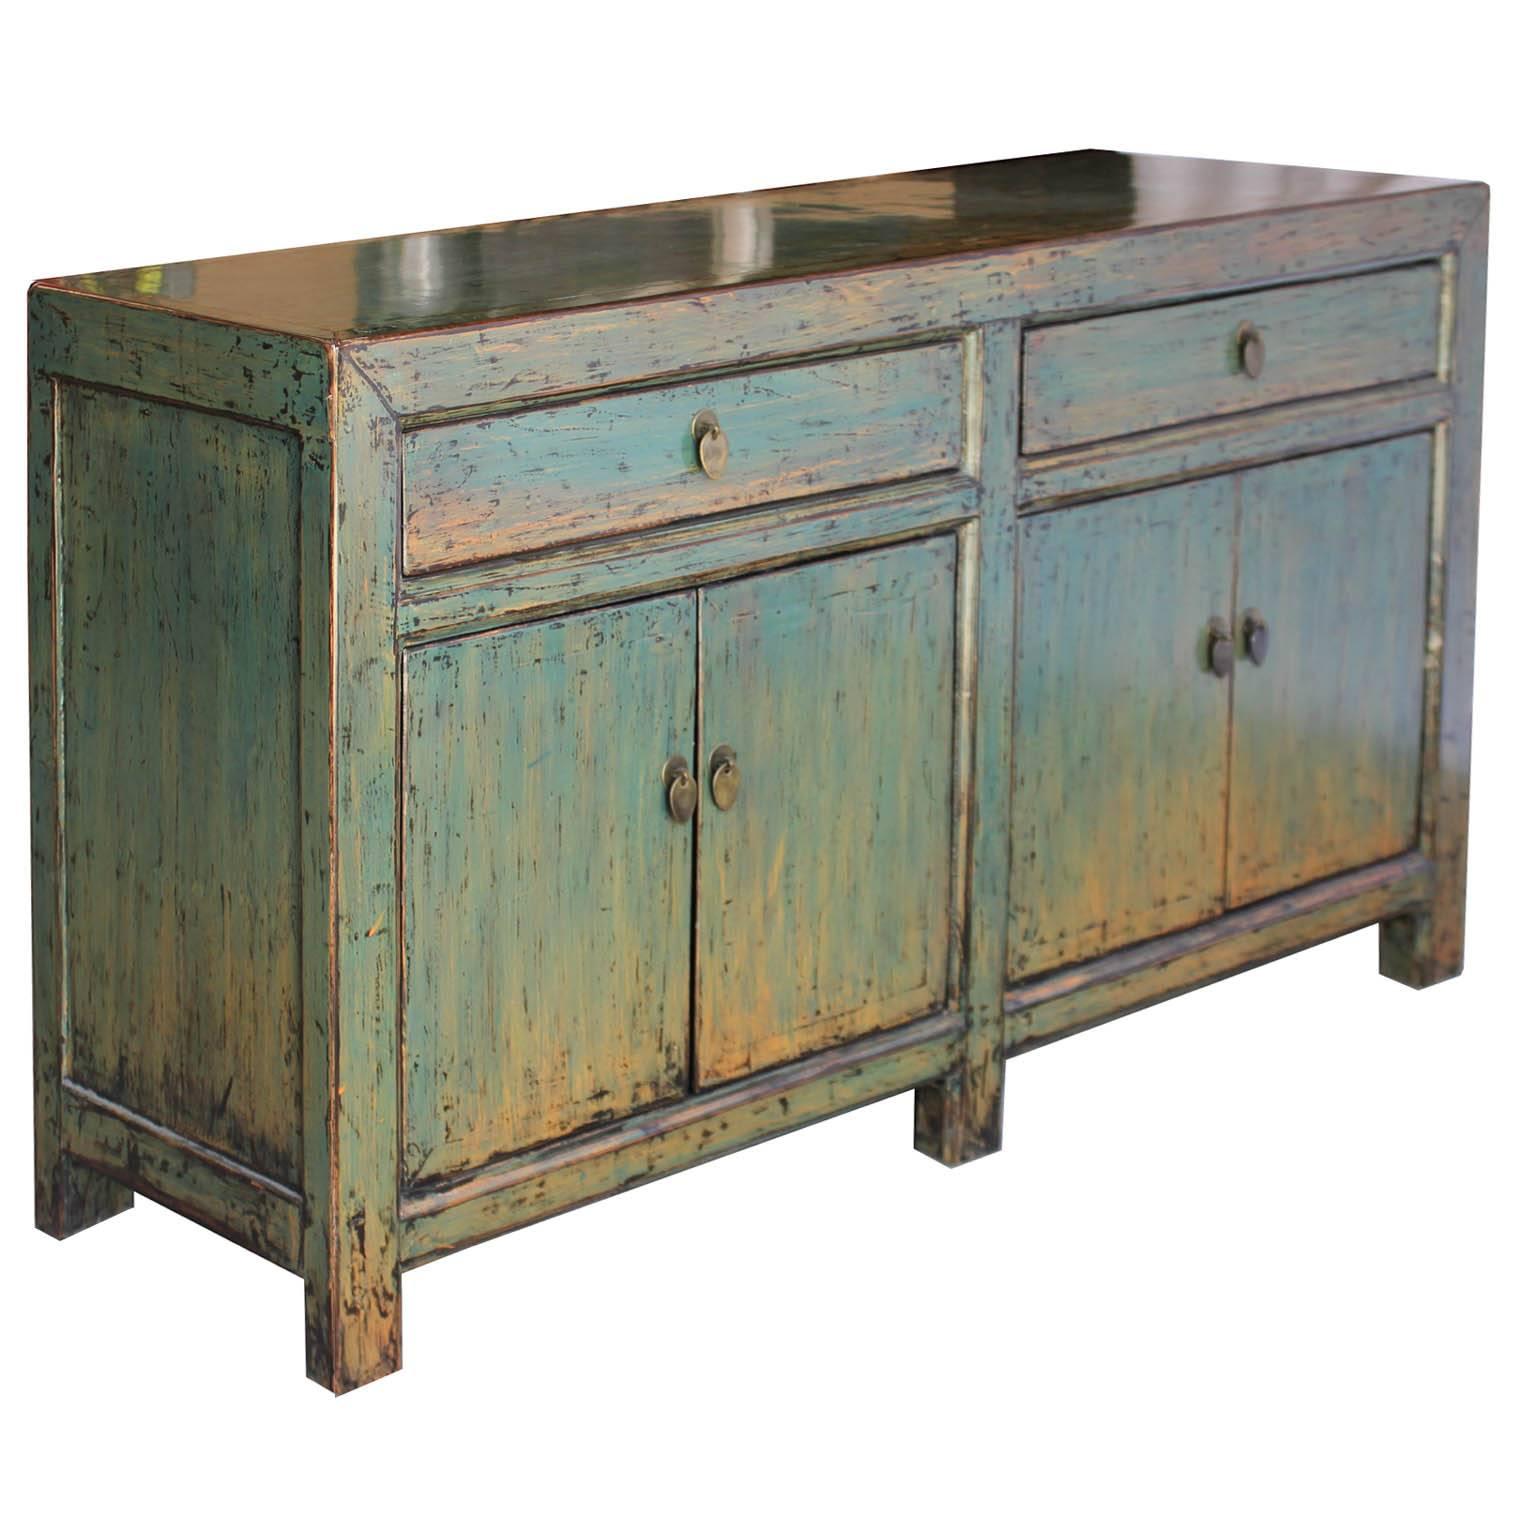 Two-drawer sideboard with hand-painted green/blue lacquer can be used as a server in the dining room or beneath a flat screen TV or artwork.